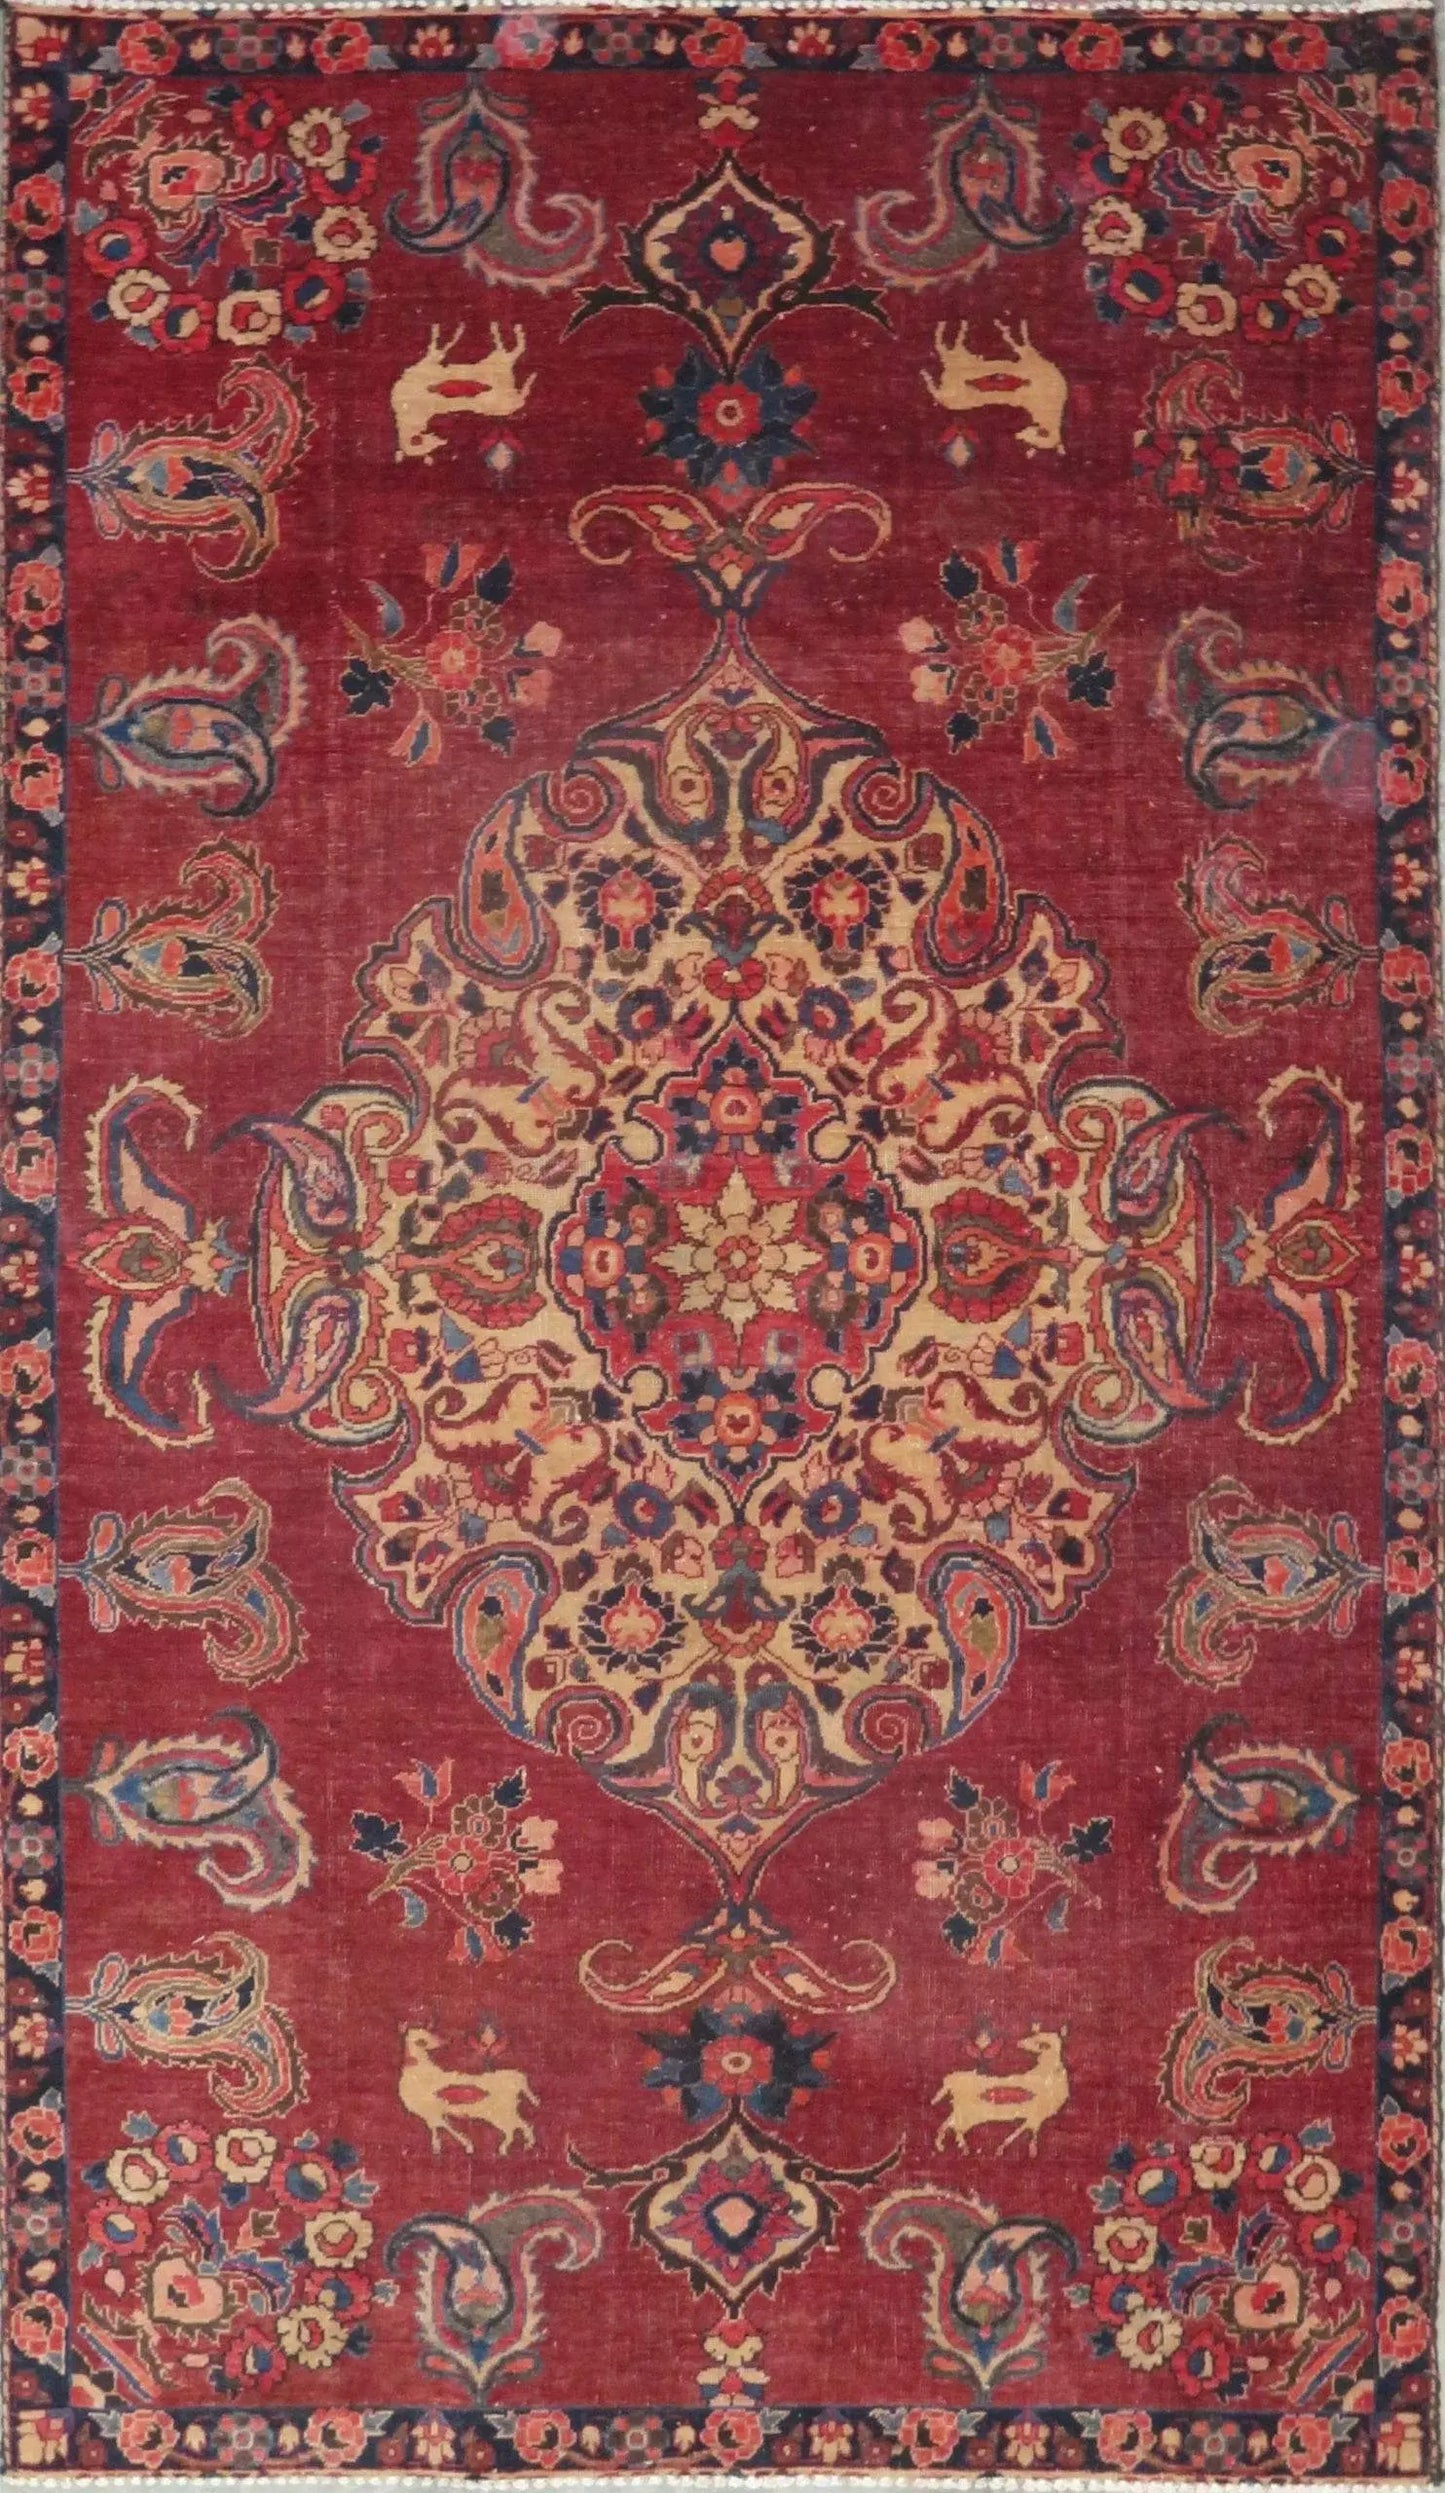 Hand-Knotted Persian Wool Rug _ Luxurious Vintage Design, 7'11" x 4'10", Artisan Crafted